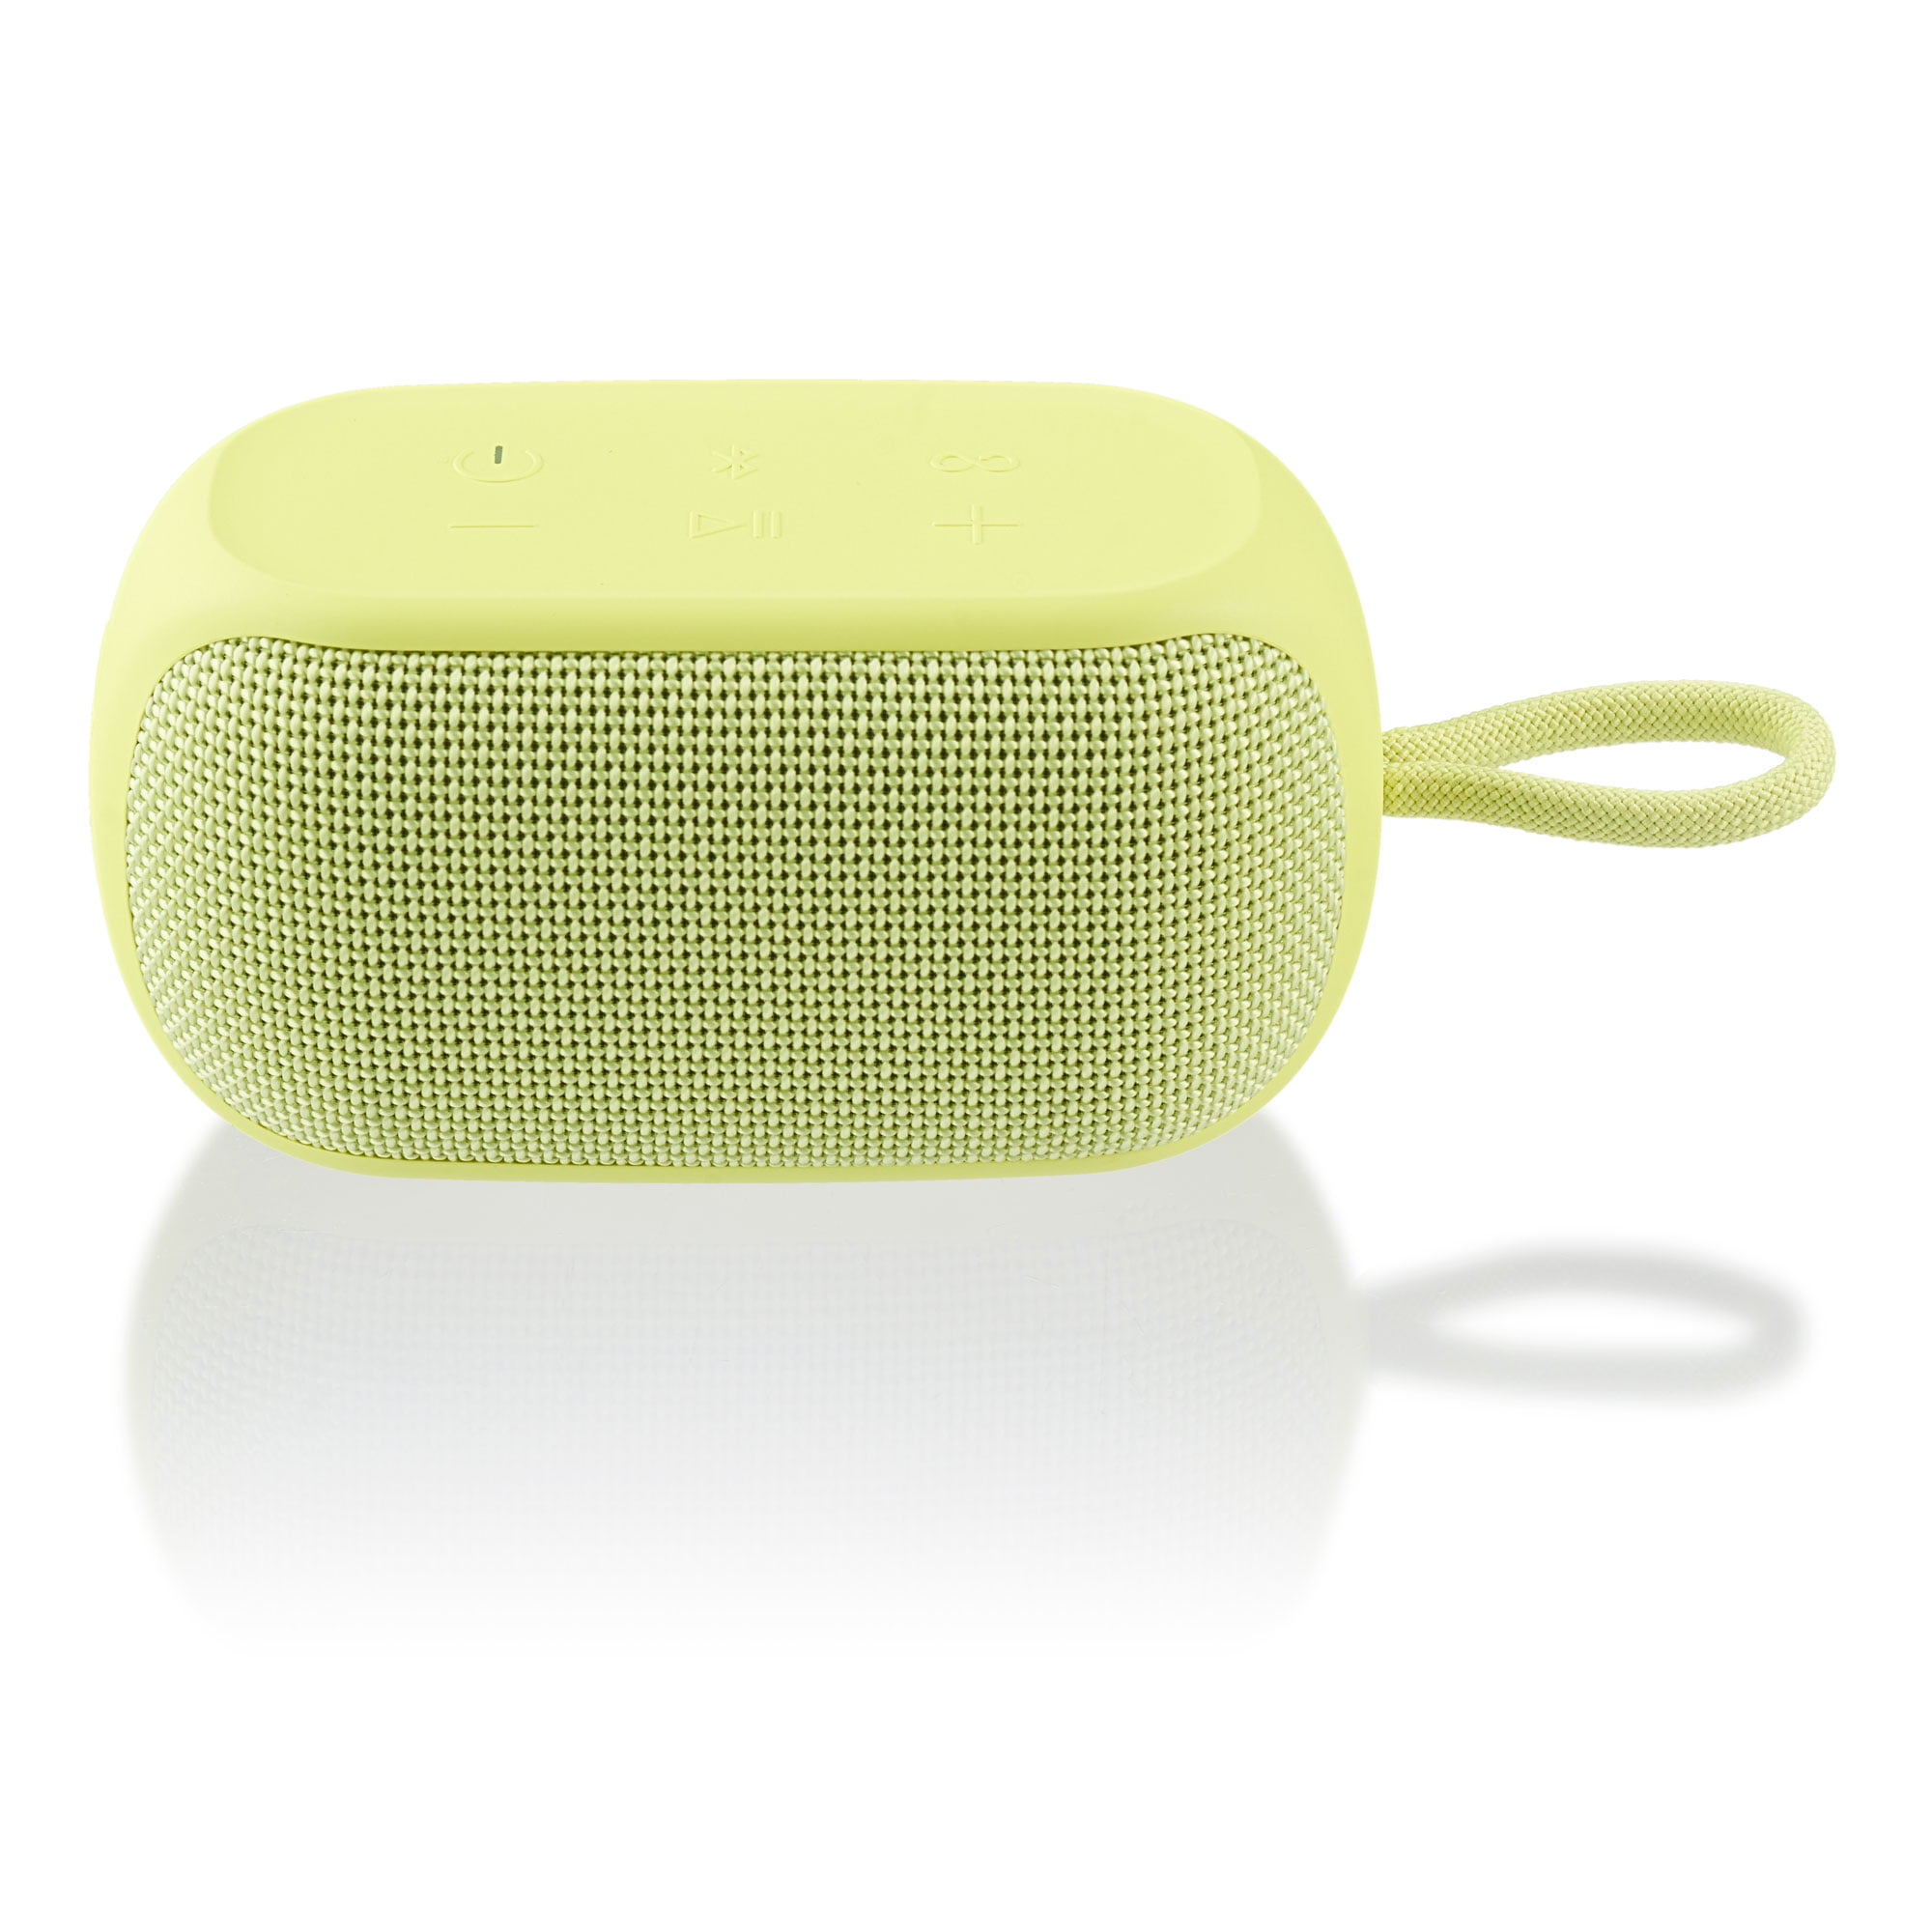 onn. Small Rugged Speaker with Bluetooth Wireless Technology, Yellow